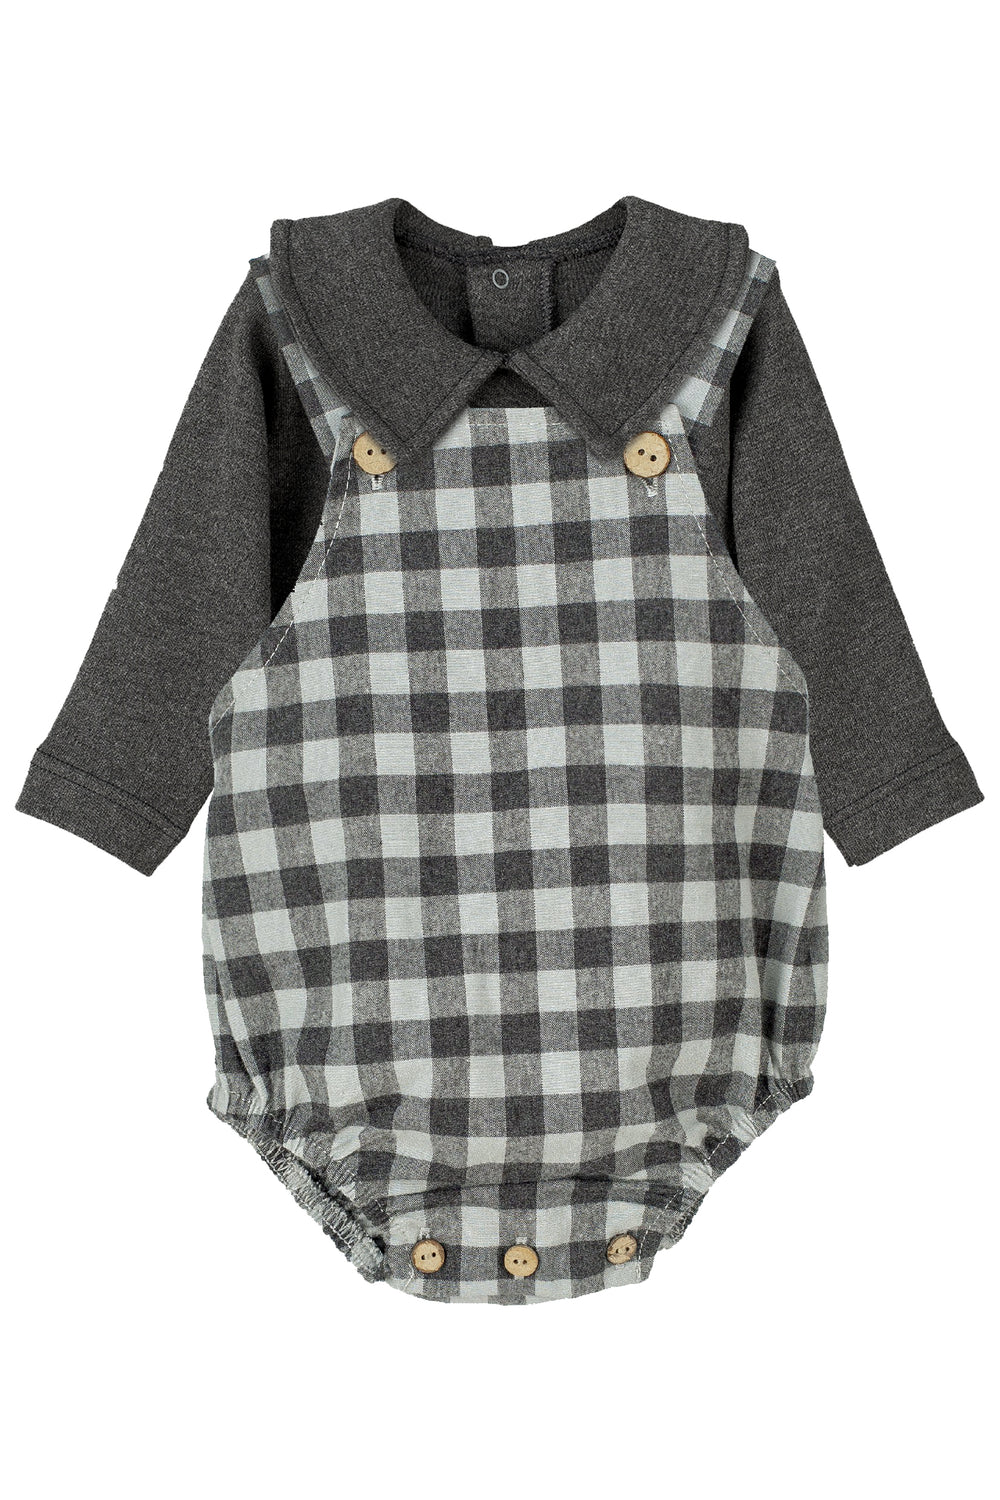 Calamaro "Marley" Charcoal Bodysuit & Checked Dungaree Romper | Millie and John